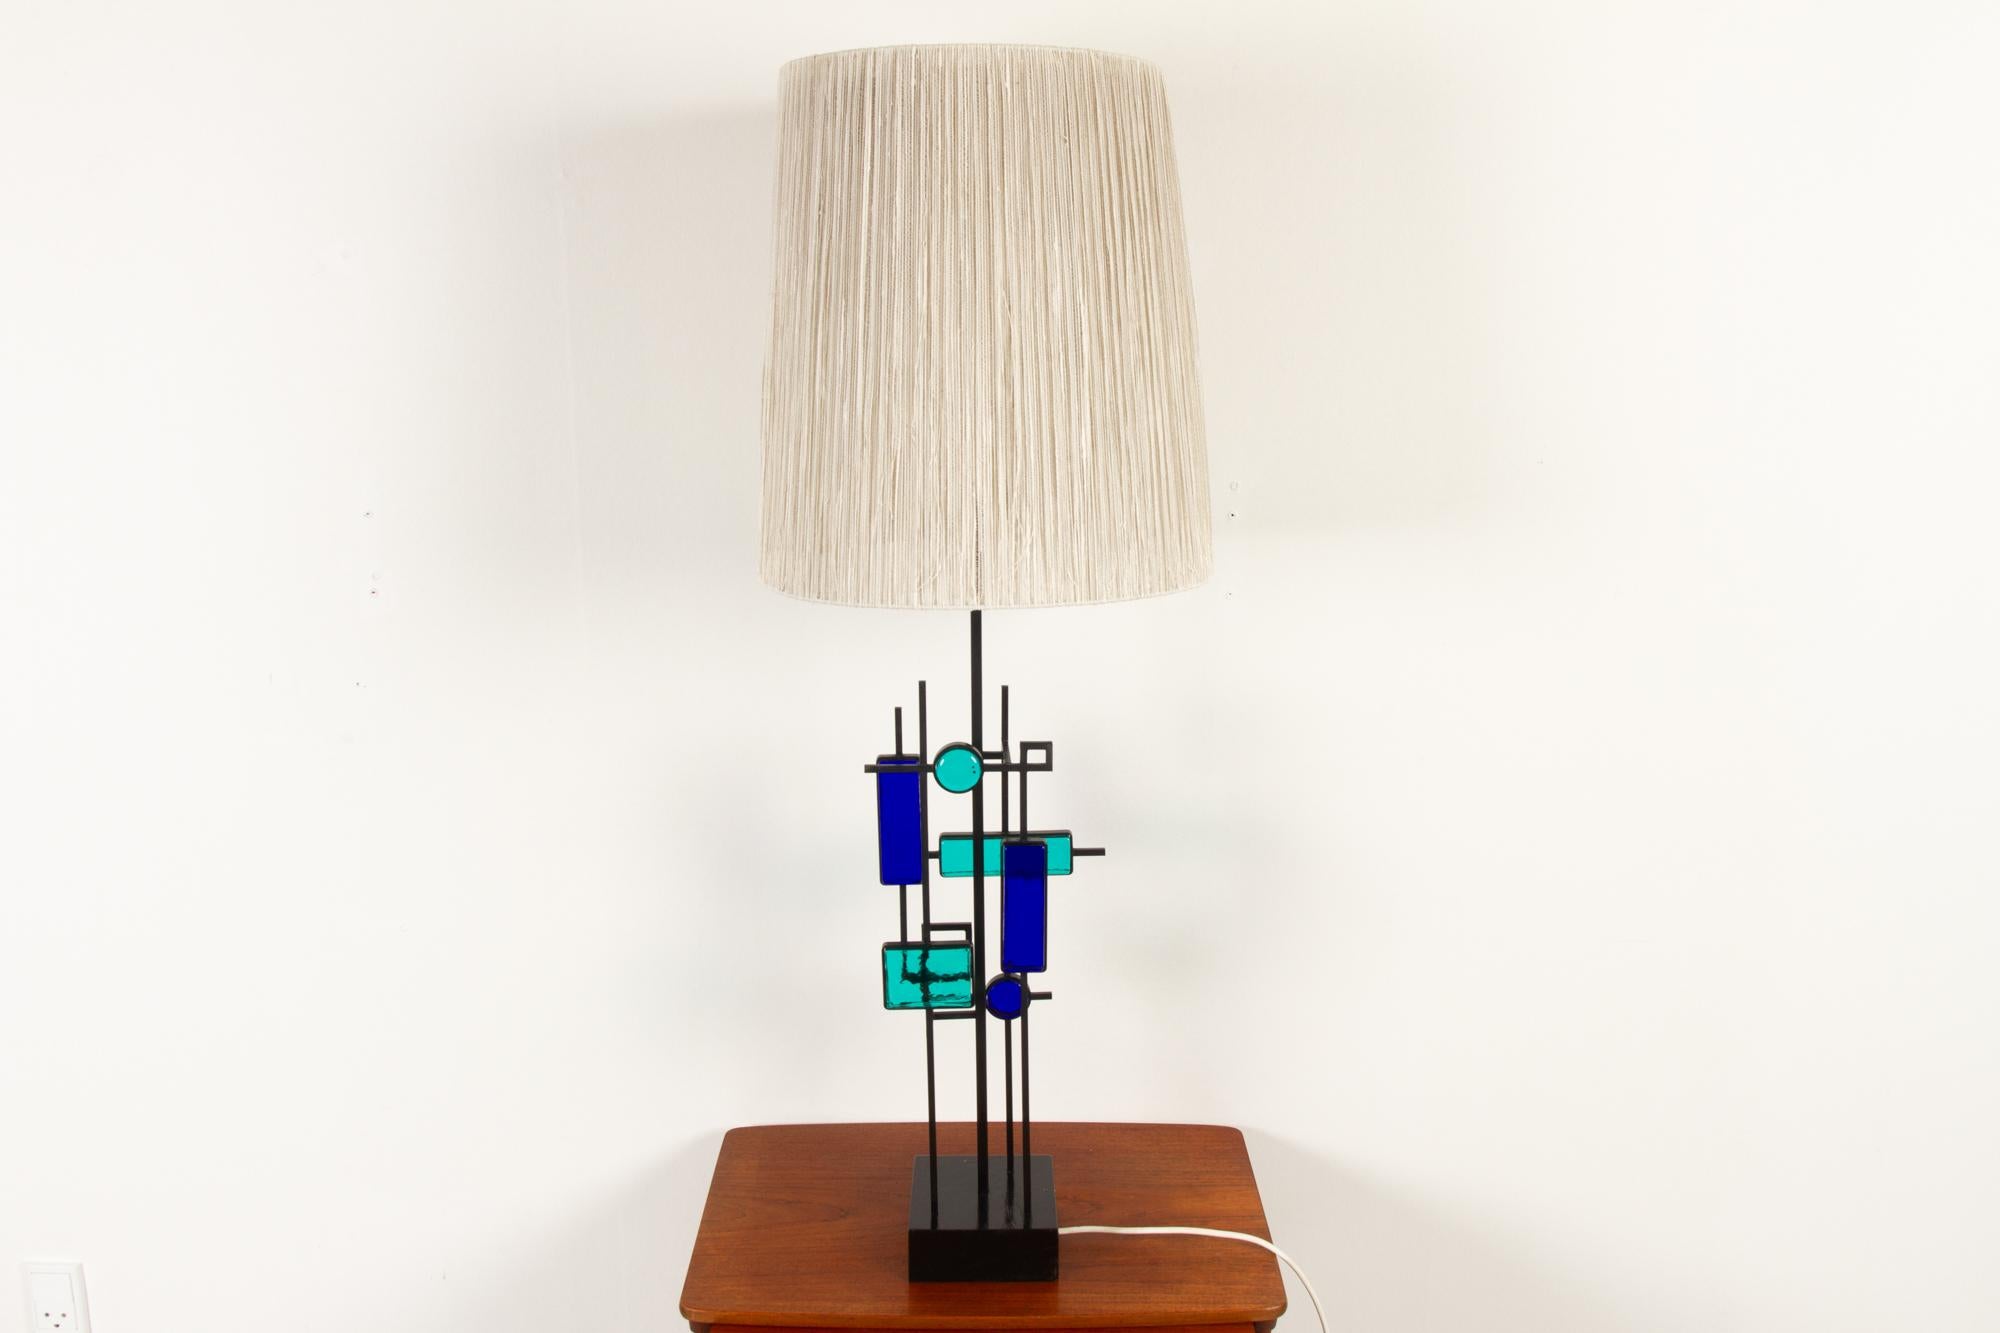 Scandinavian Modern table lamp by Svend Aage Holm Sørensen for Holm Sørensen & Co, Denmark 1960s
Very tall table lamp in black lacquered iron and colored glass in blue and green. Including the rare original lamp shade. Base in black lacquered